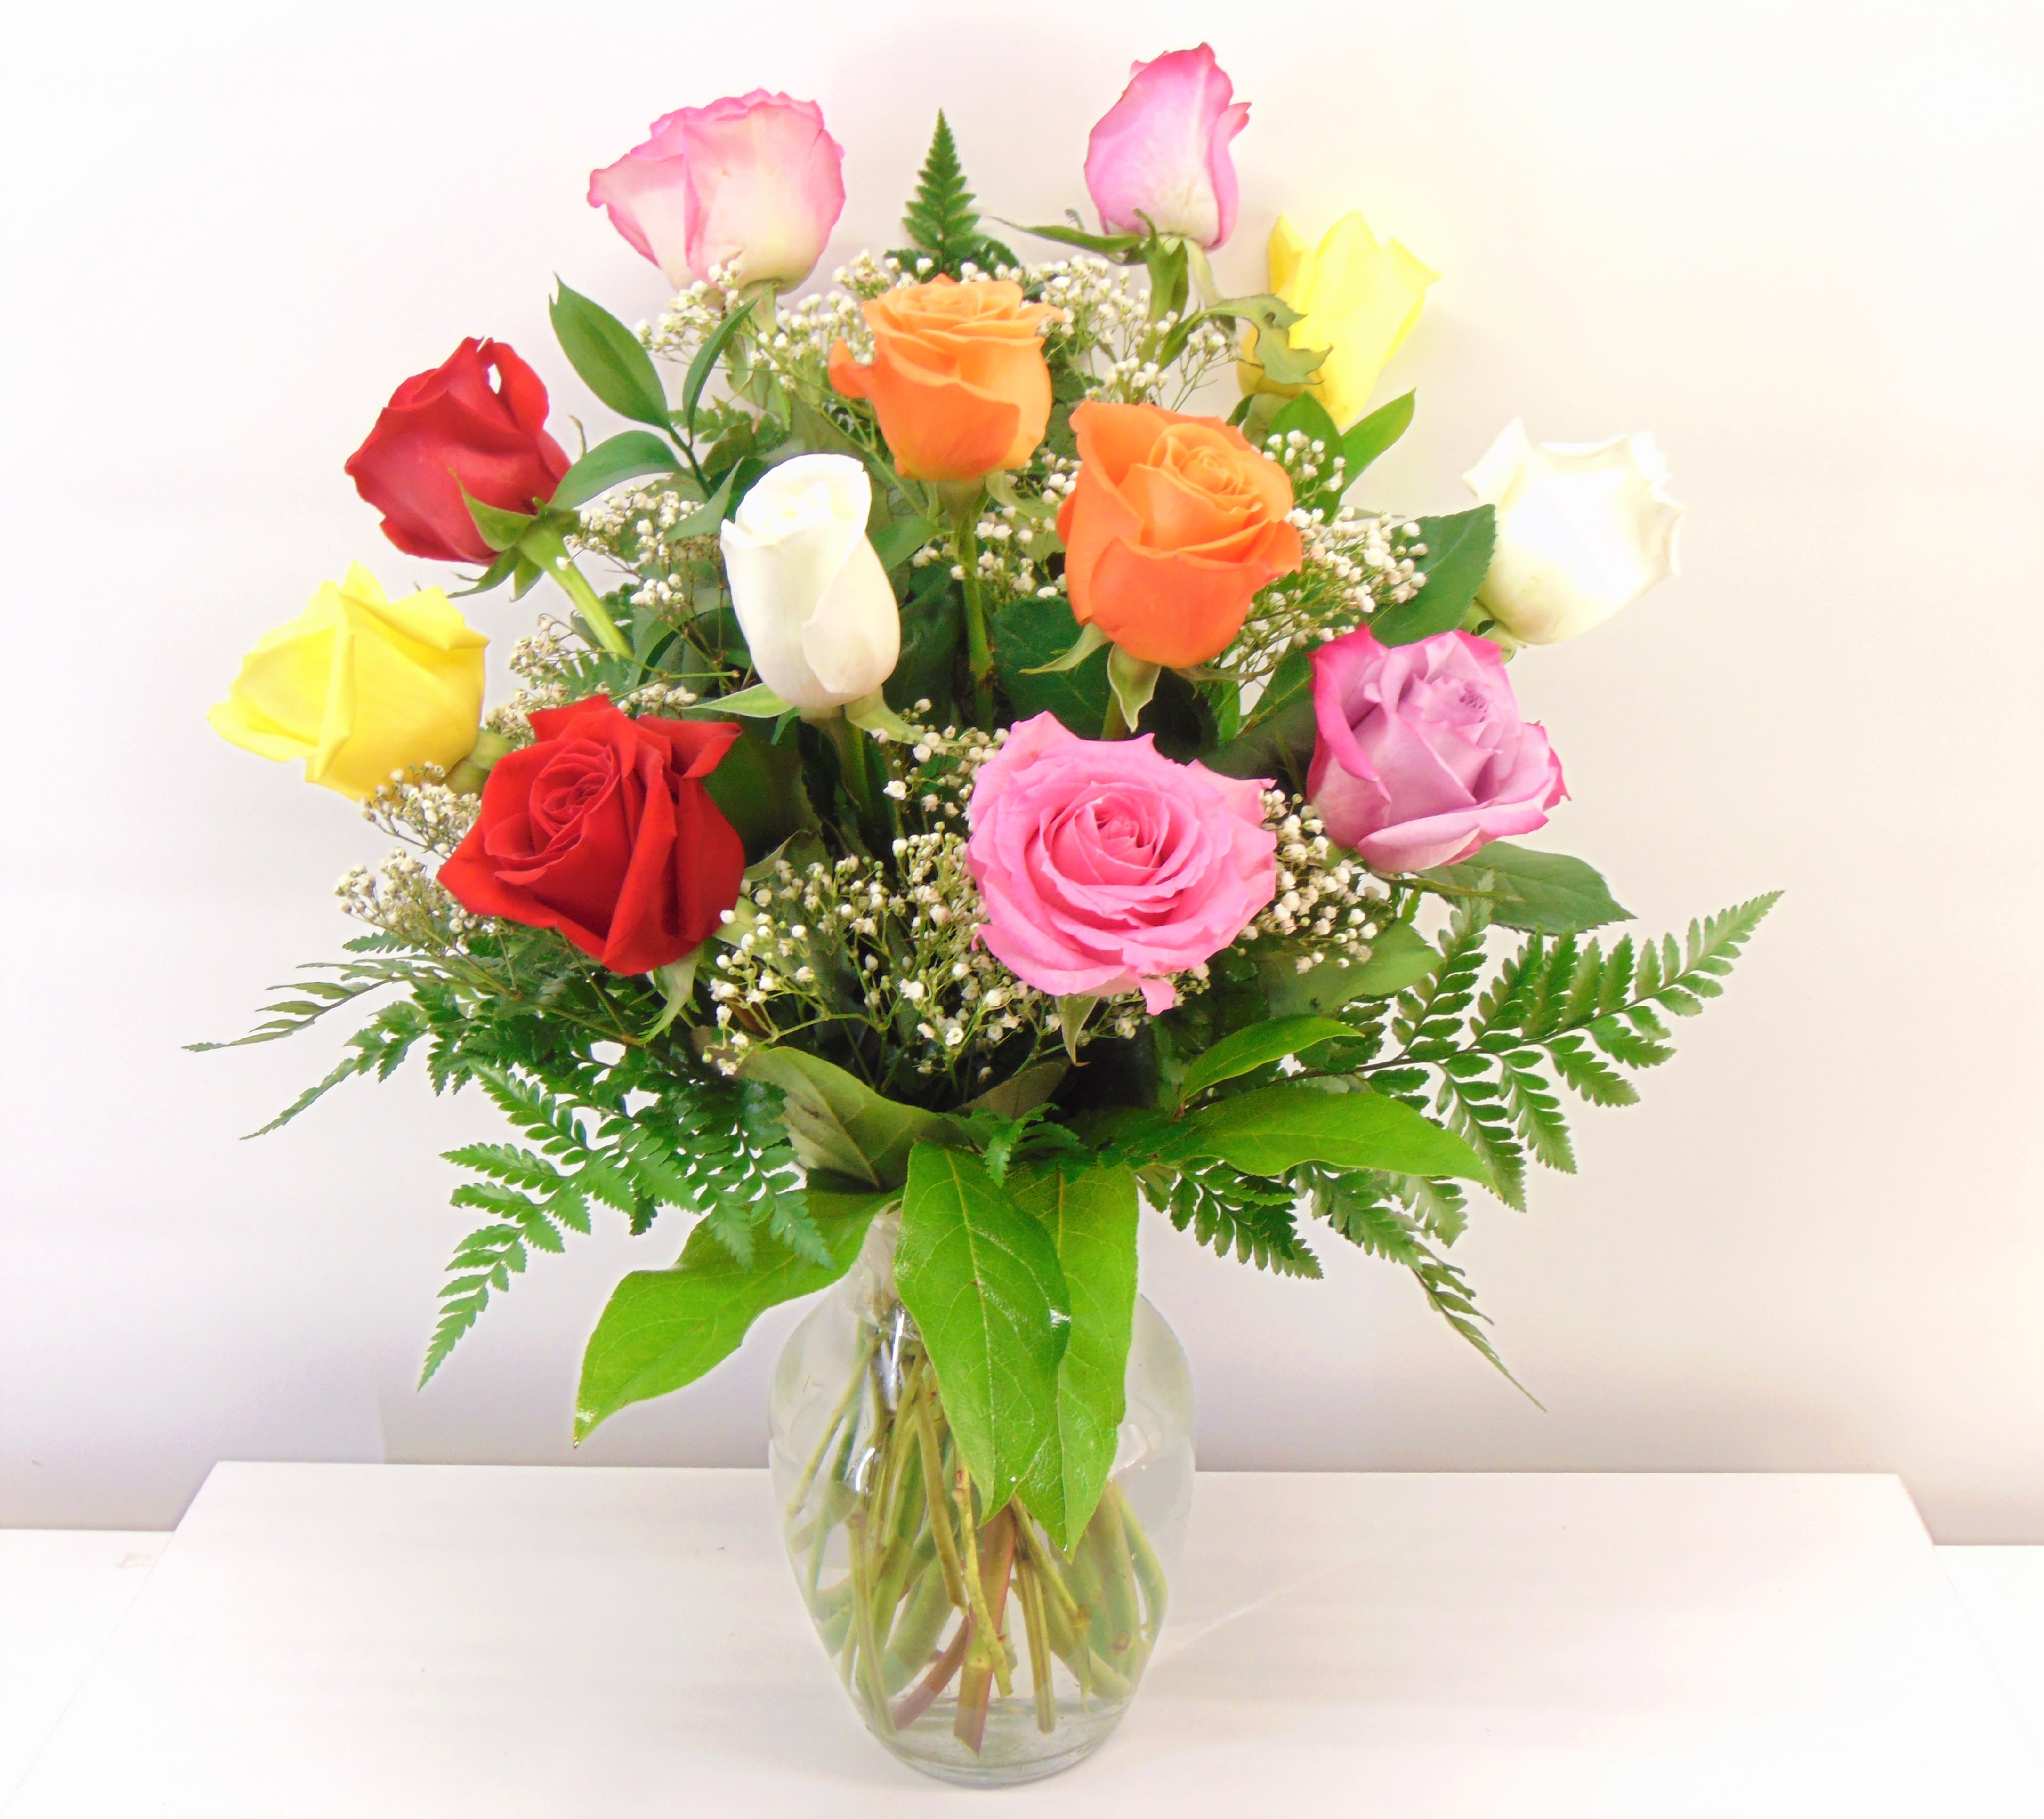 Rainbow Roses - One dozen assorted color roses arranged with baby's breath and greenery in a clear glass vase. 